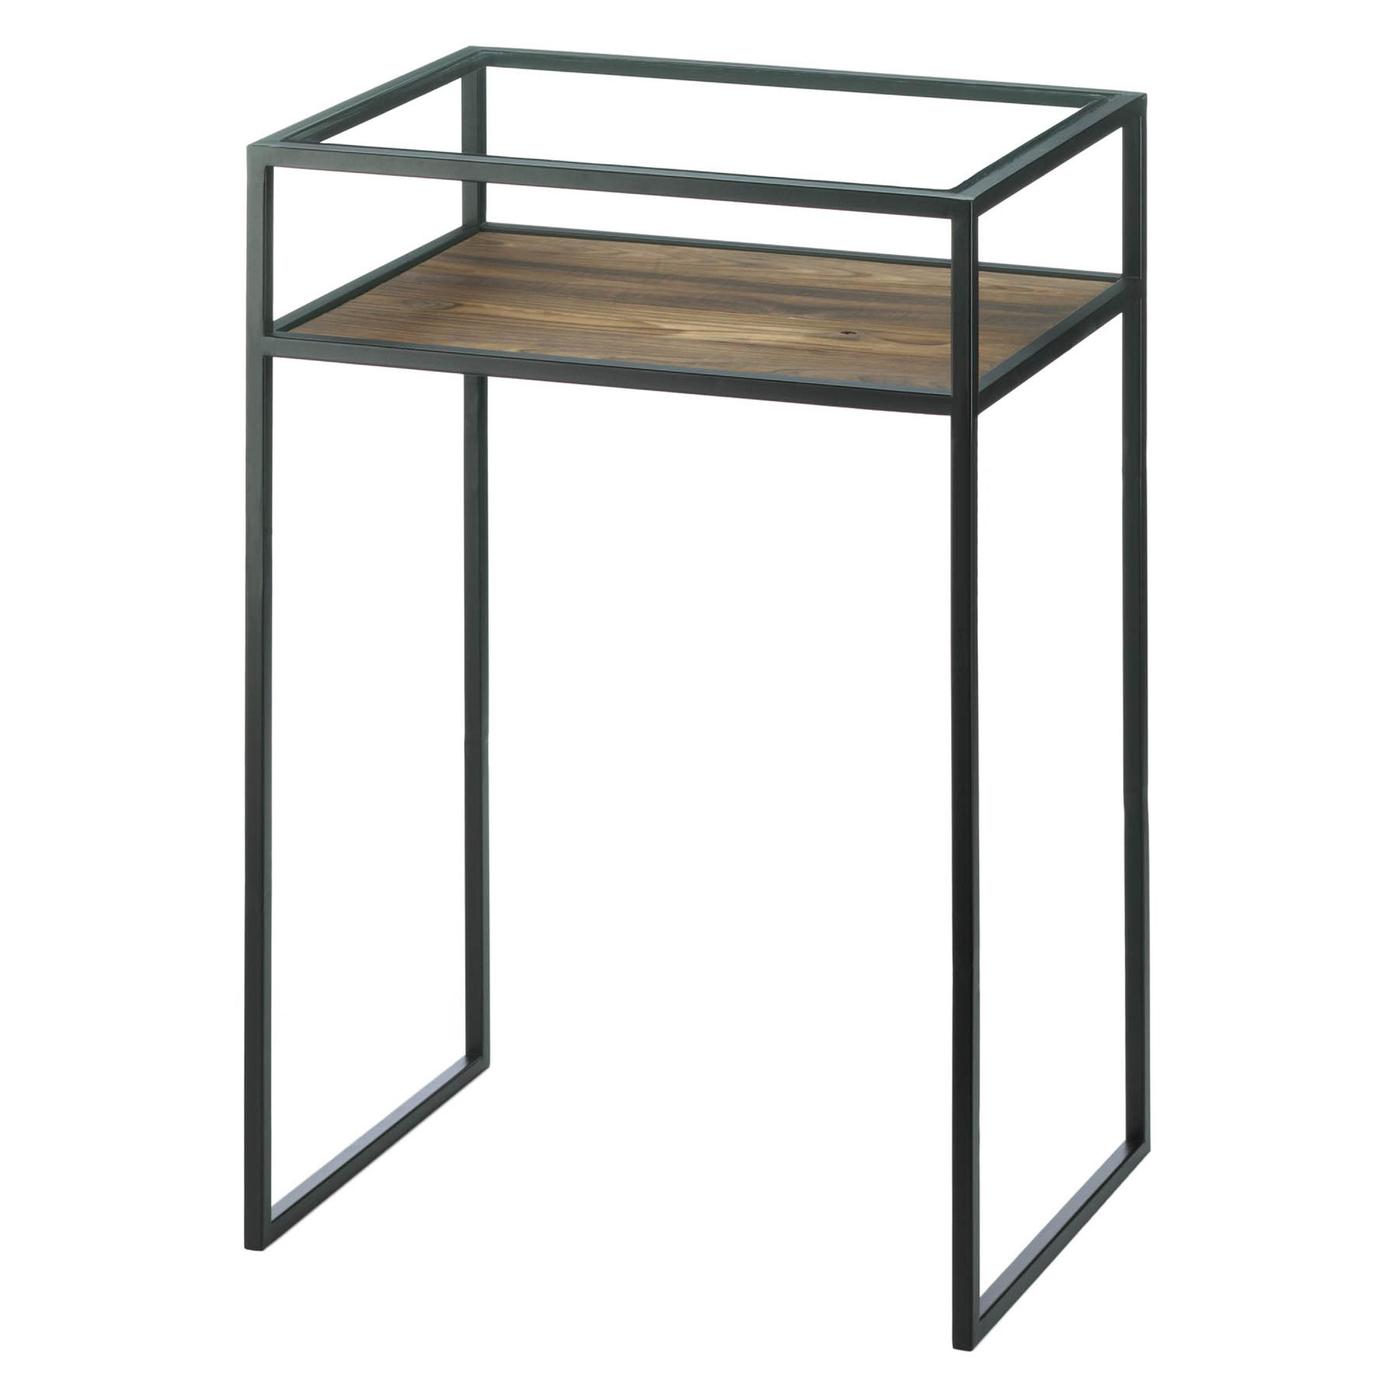 Modern Industrial Style Table